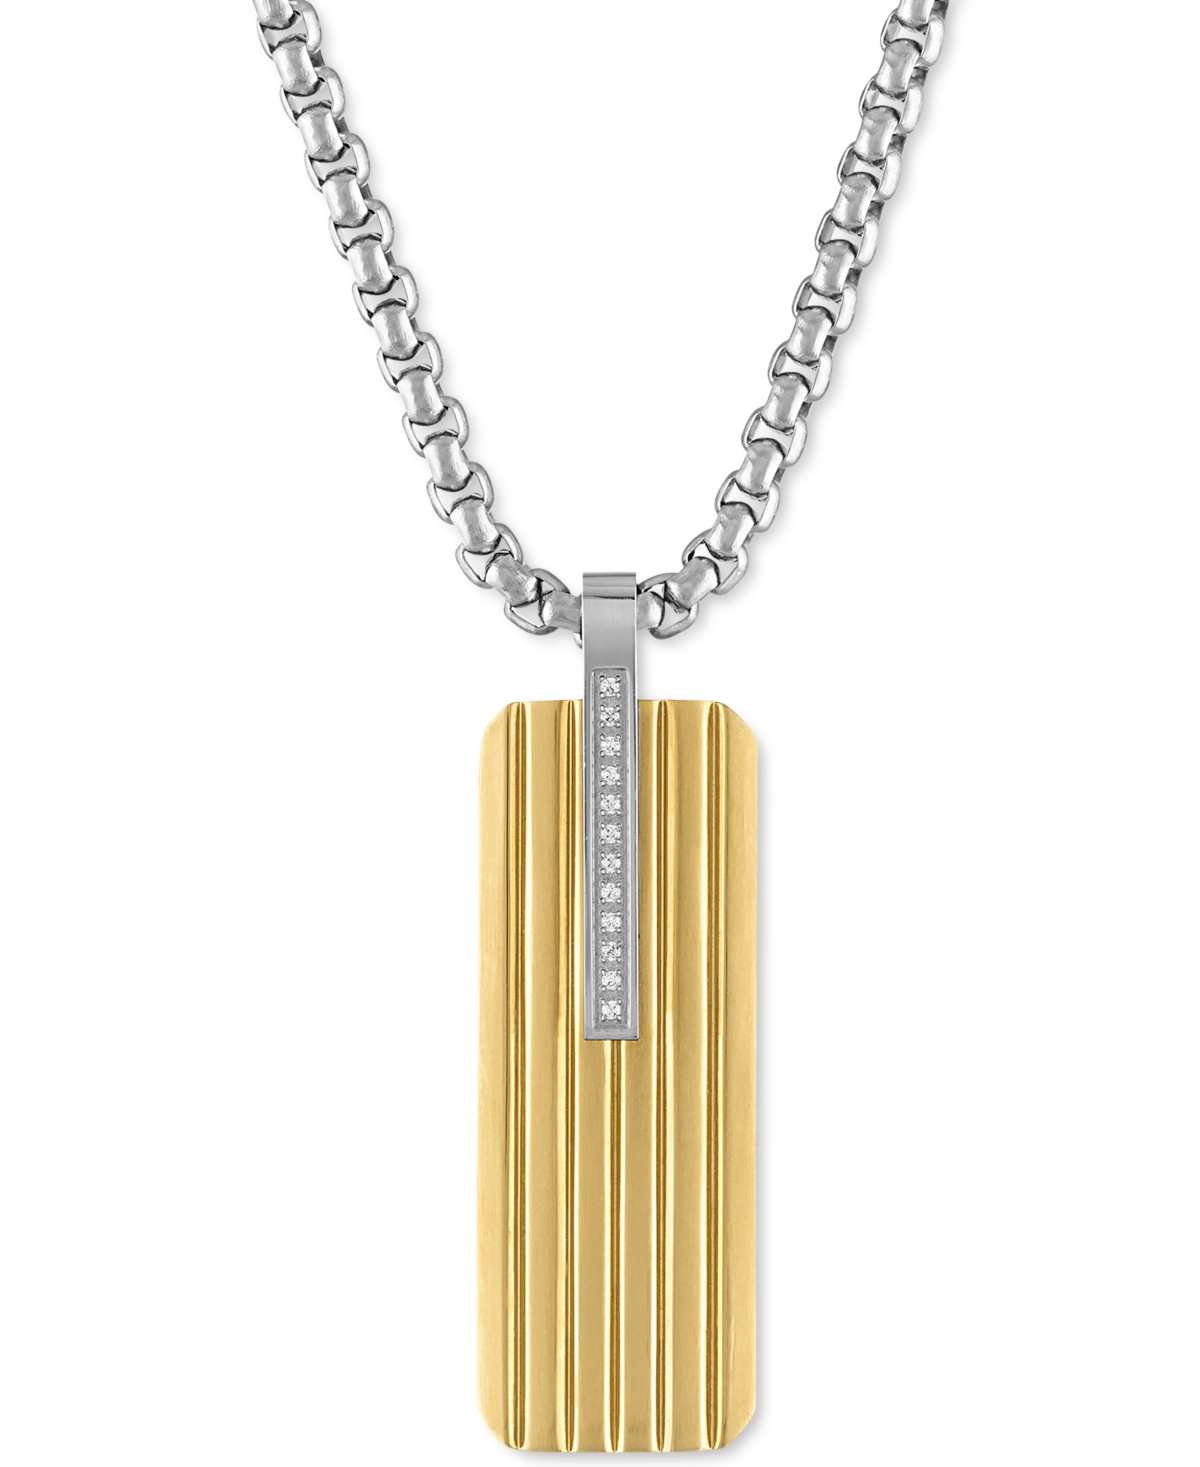 Diamond Accent Two-Tone Dog Tag 22" Pendant Necklace in Stainless Steel & Gold-Tone Ion-Plate, Created for Macy's - Yellow